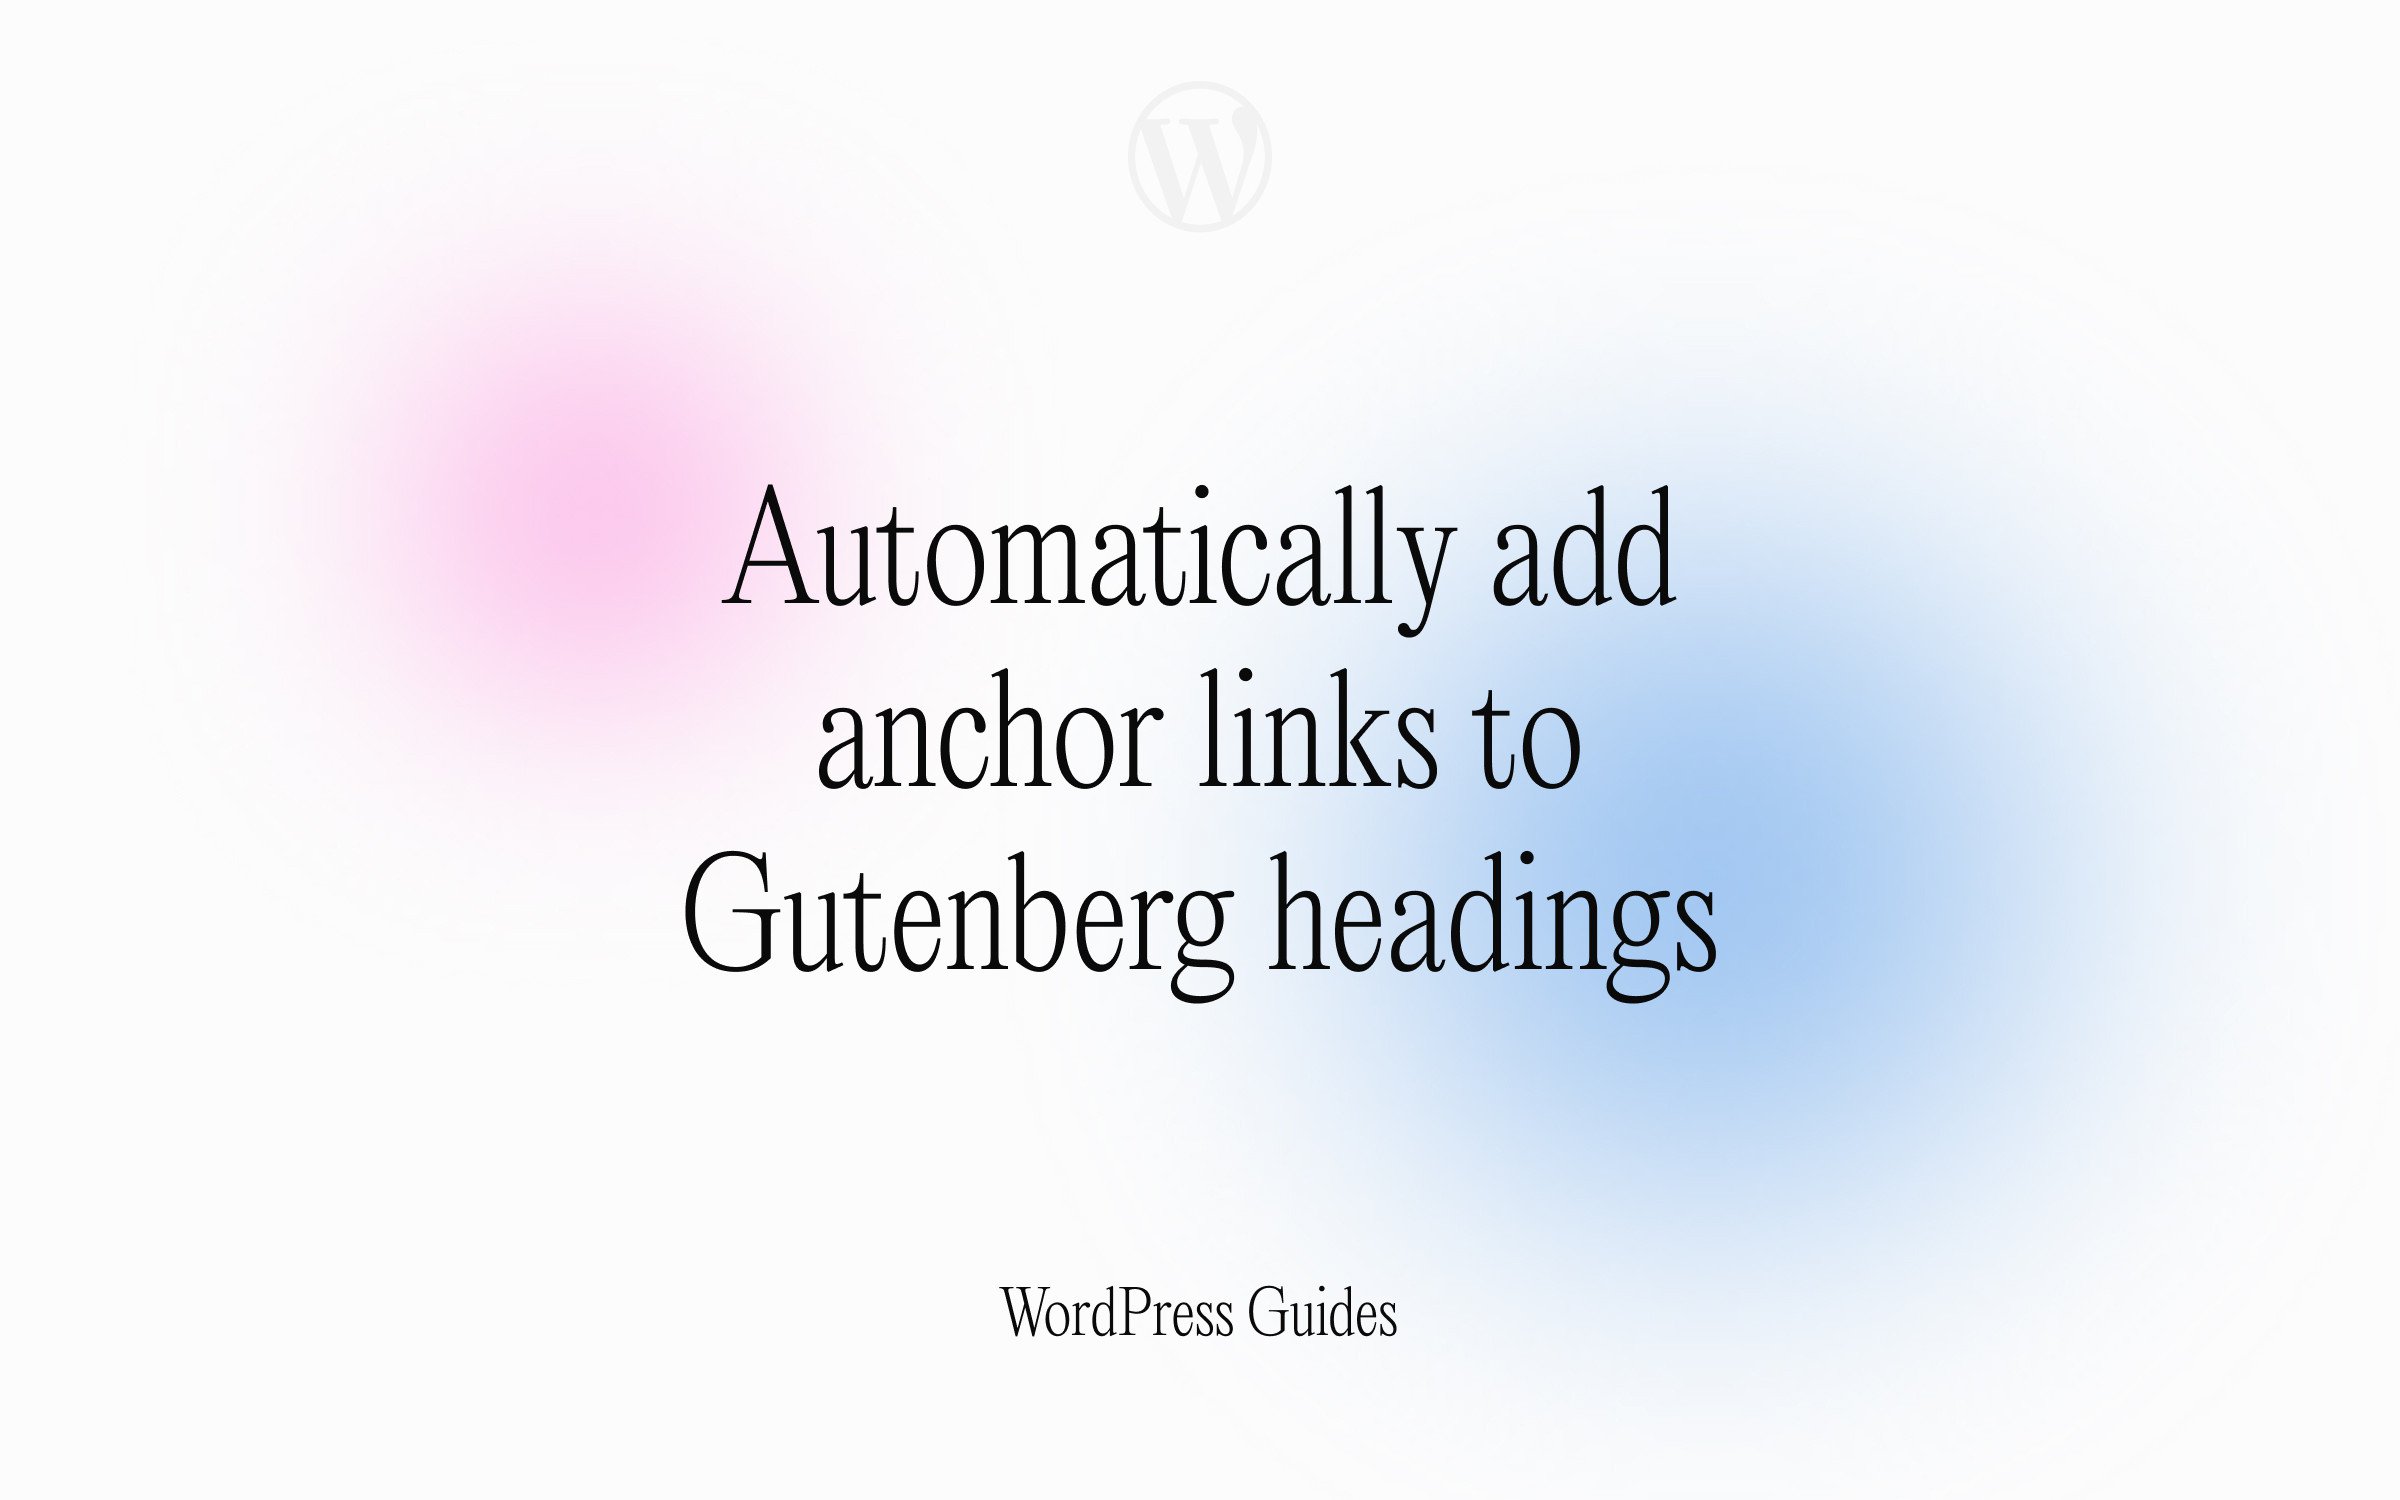 Automatically add anchor links to Gutenberg headings